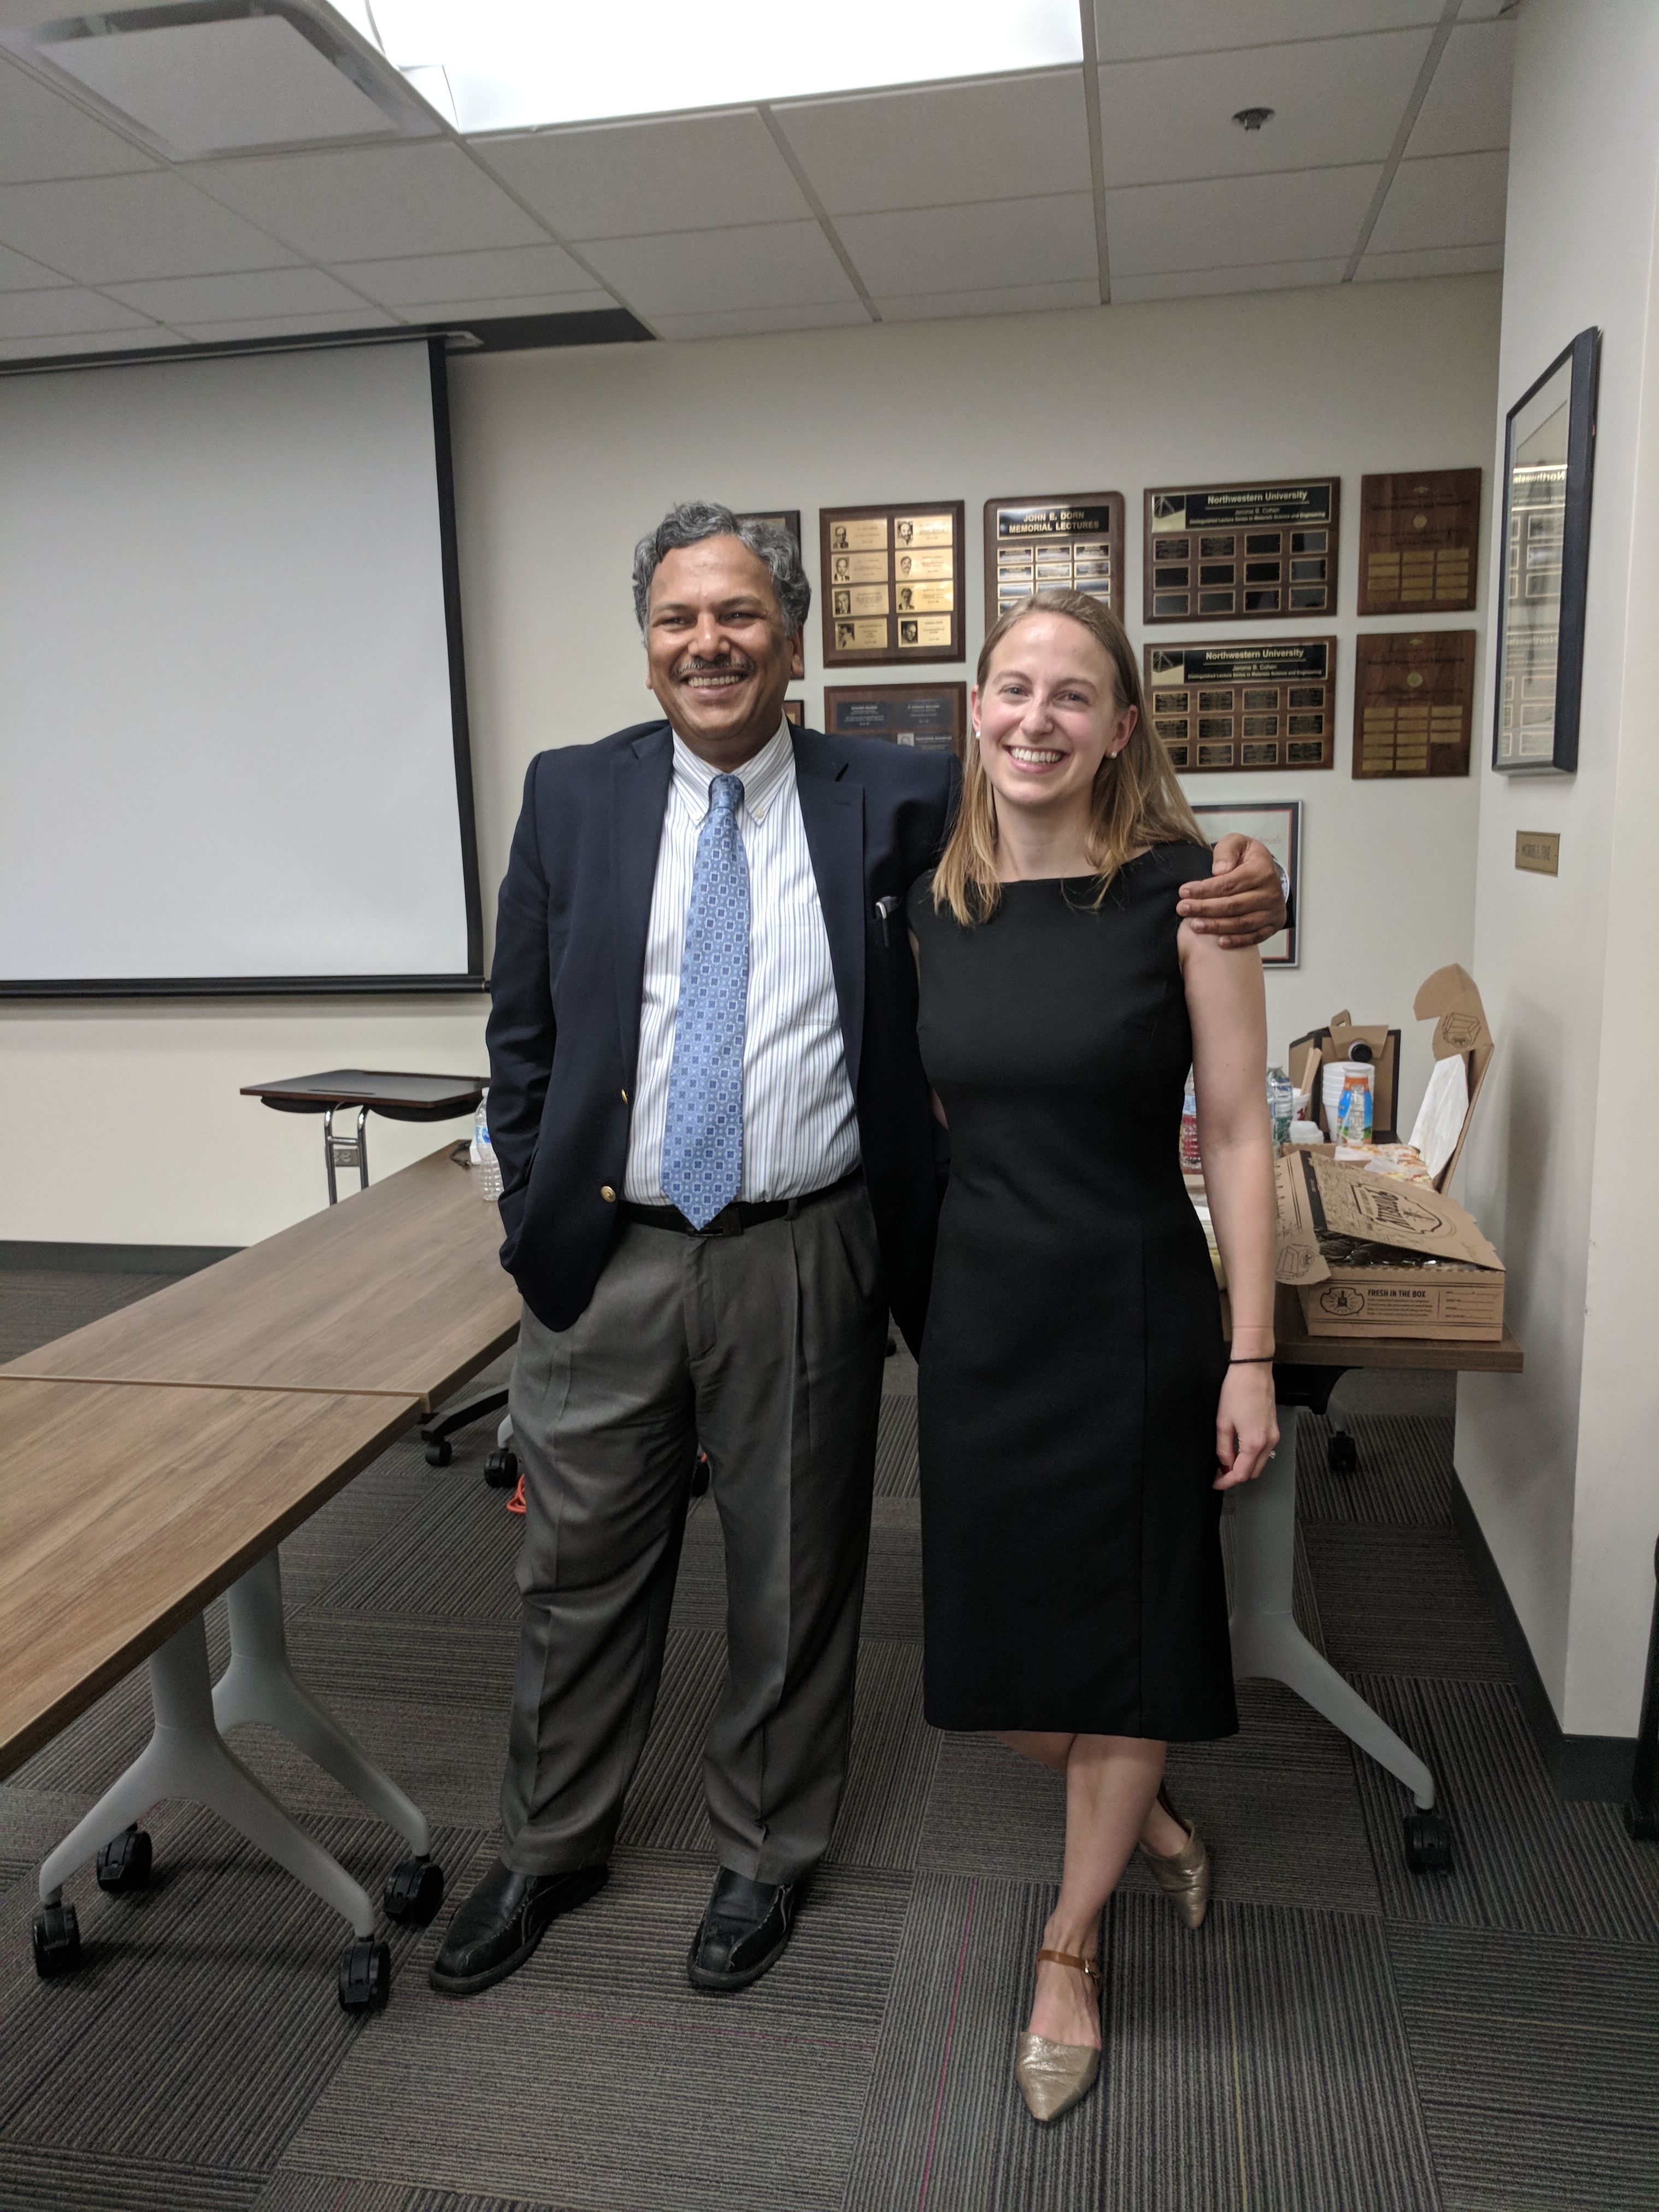 Professor Dravid with the newly titled Dr. Hanson